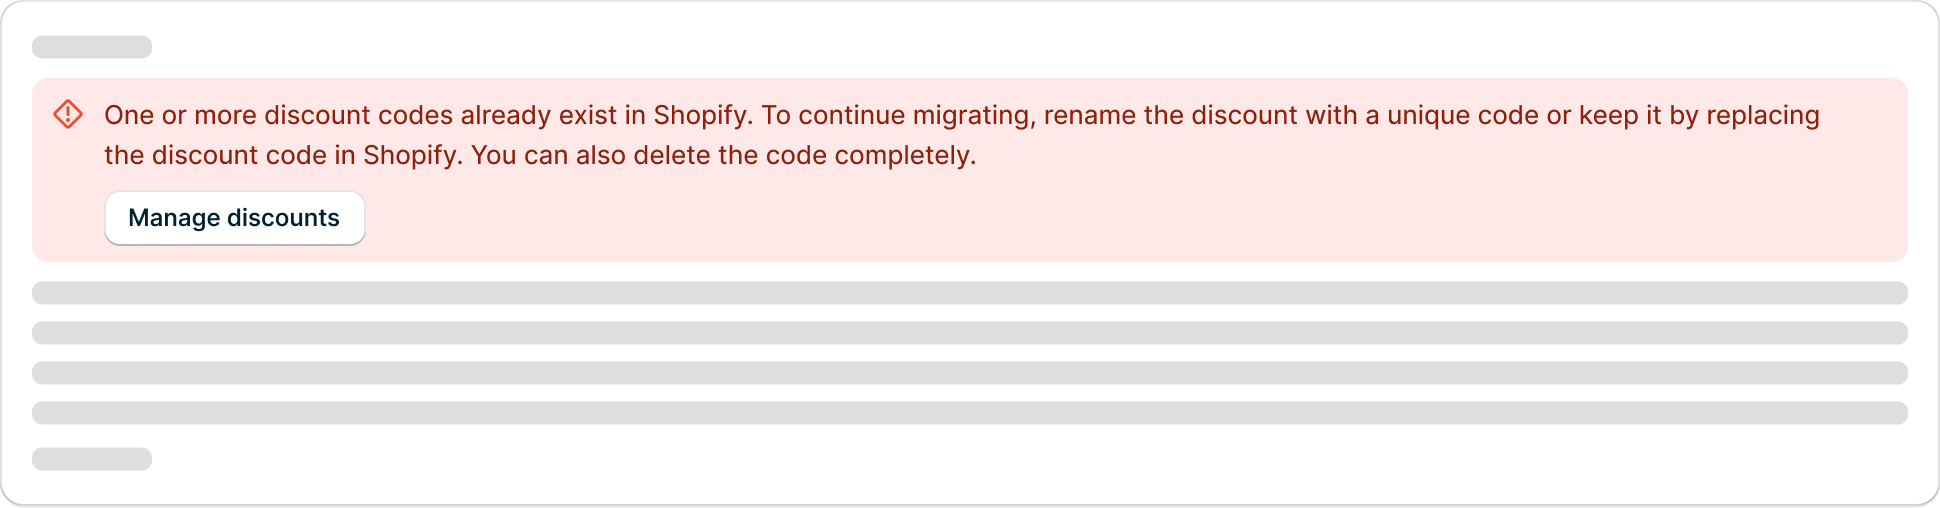 Error banners in context of a page